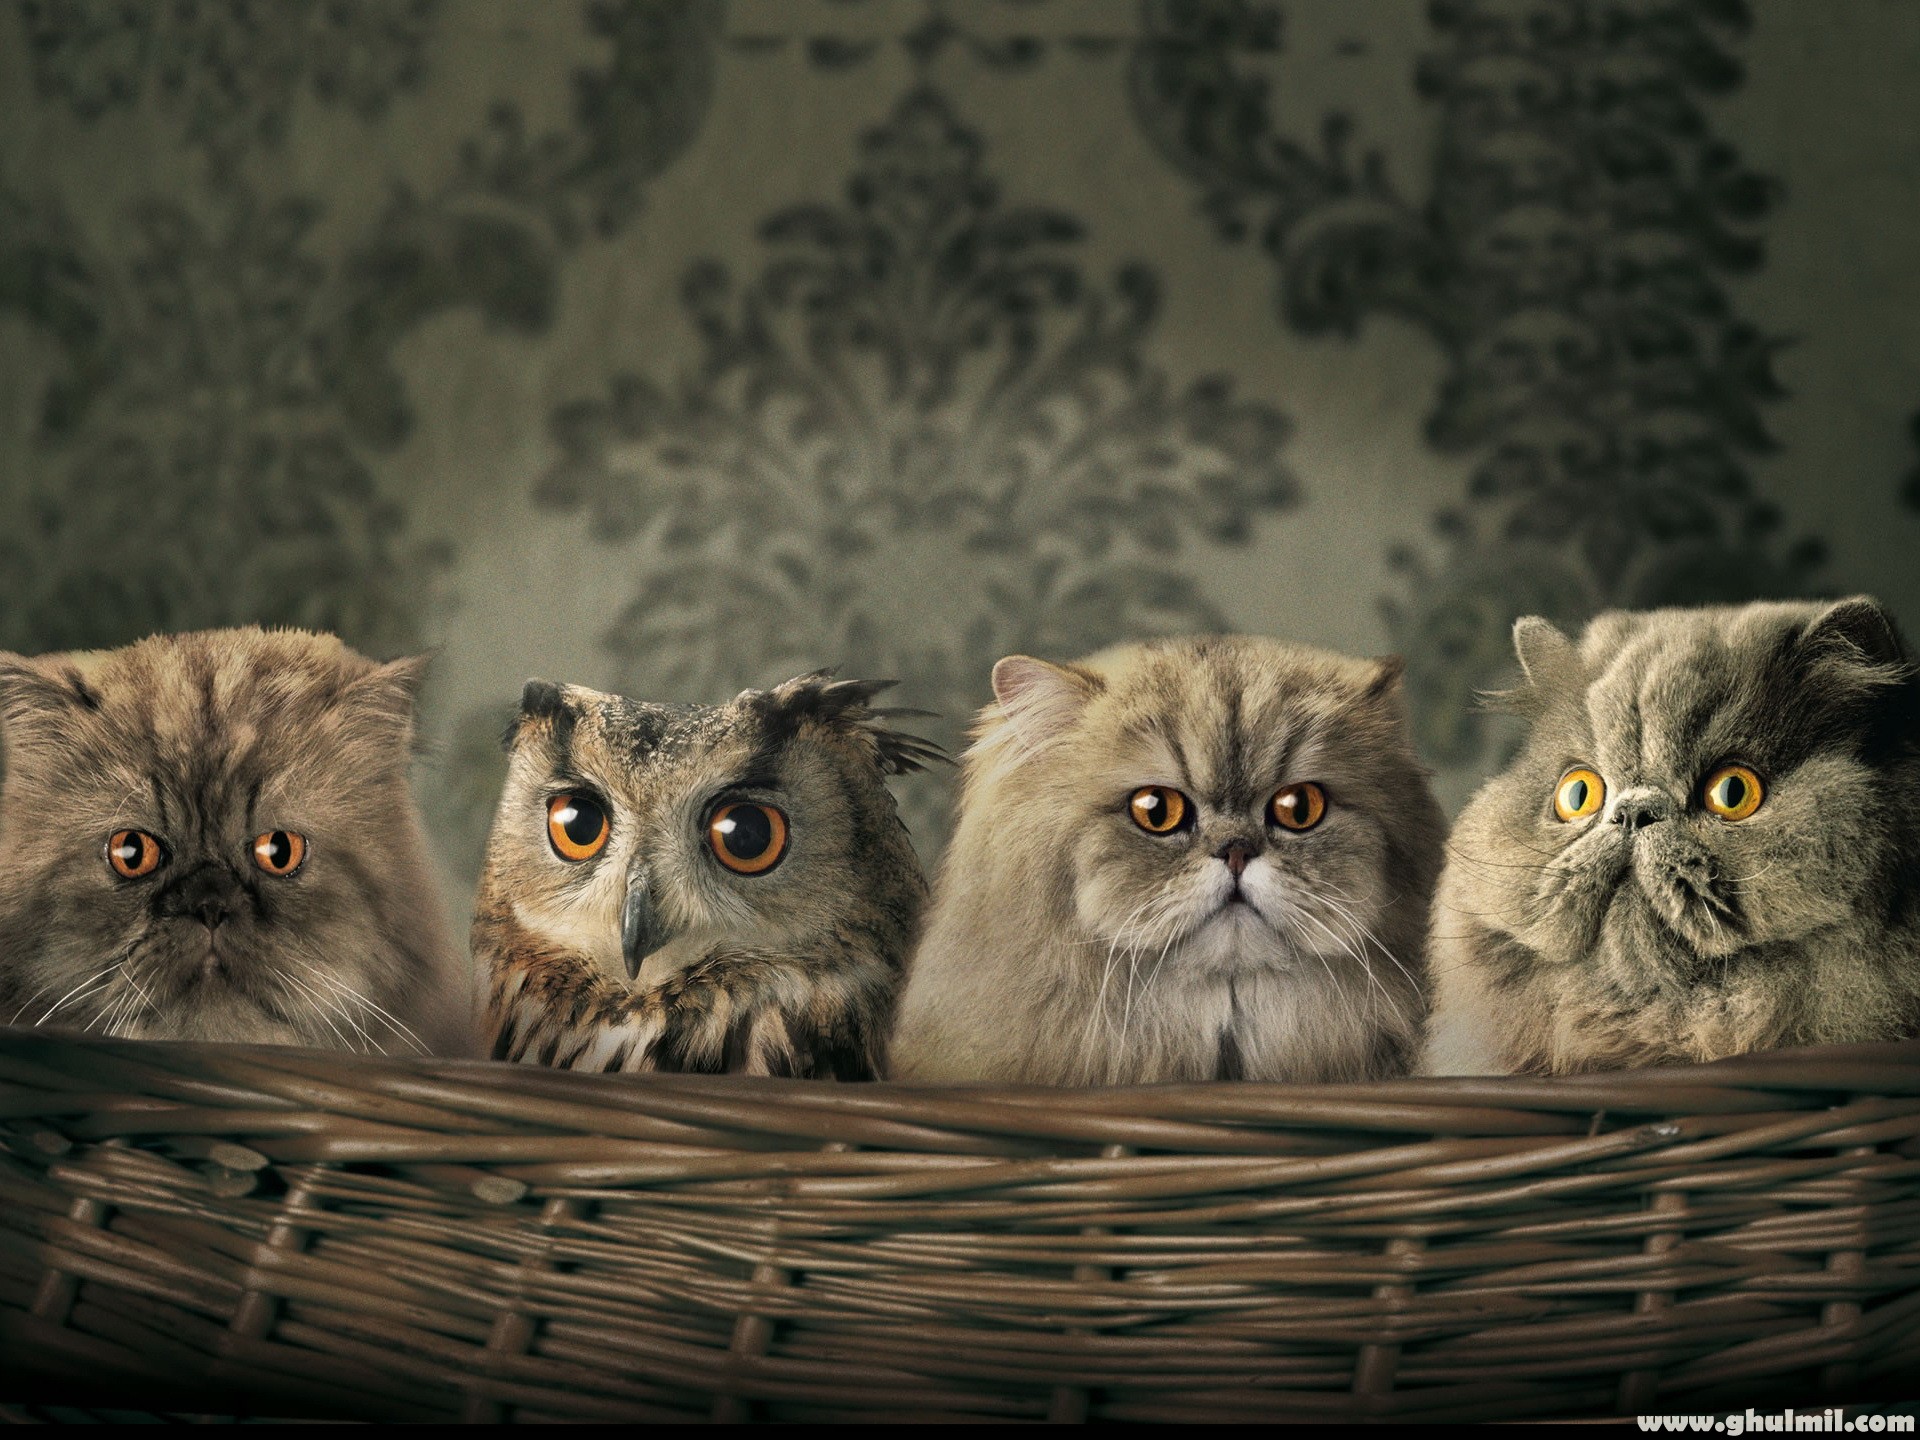 Wallpapers » Owl Among Cats Very Beautiful Amazing - Cats Owl , HD Wallpaper & Backgrounds